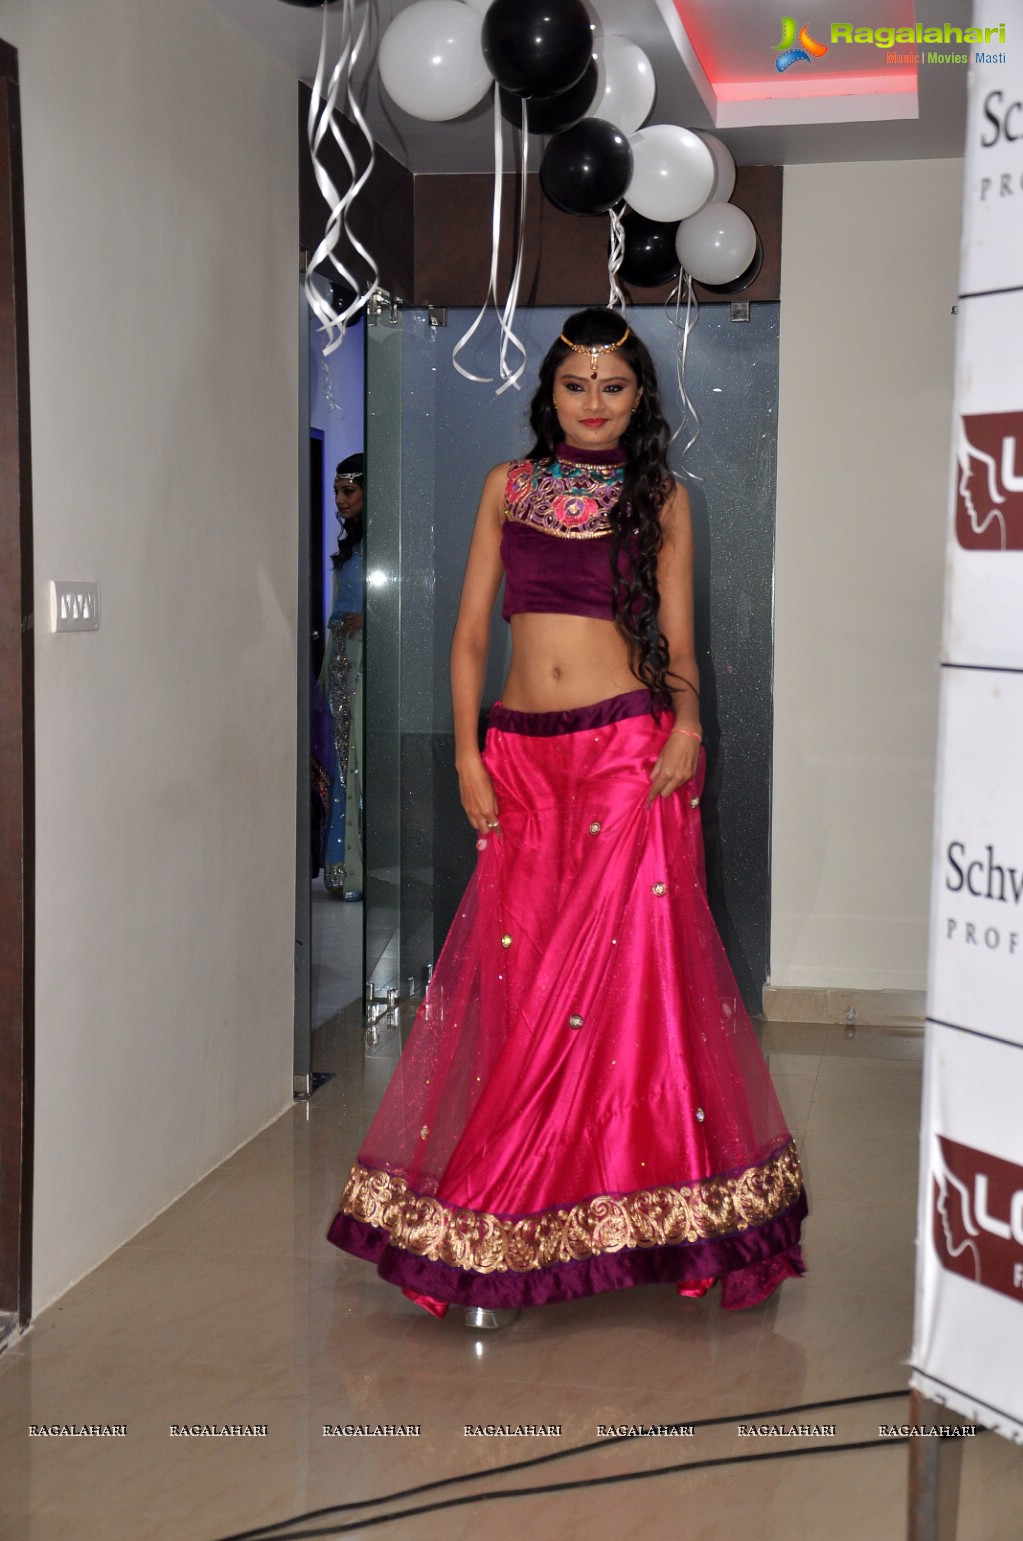 Madhurima launches Looks Salon & Spa in Hyderabad